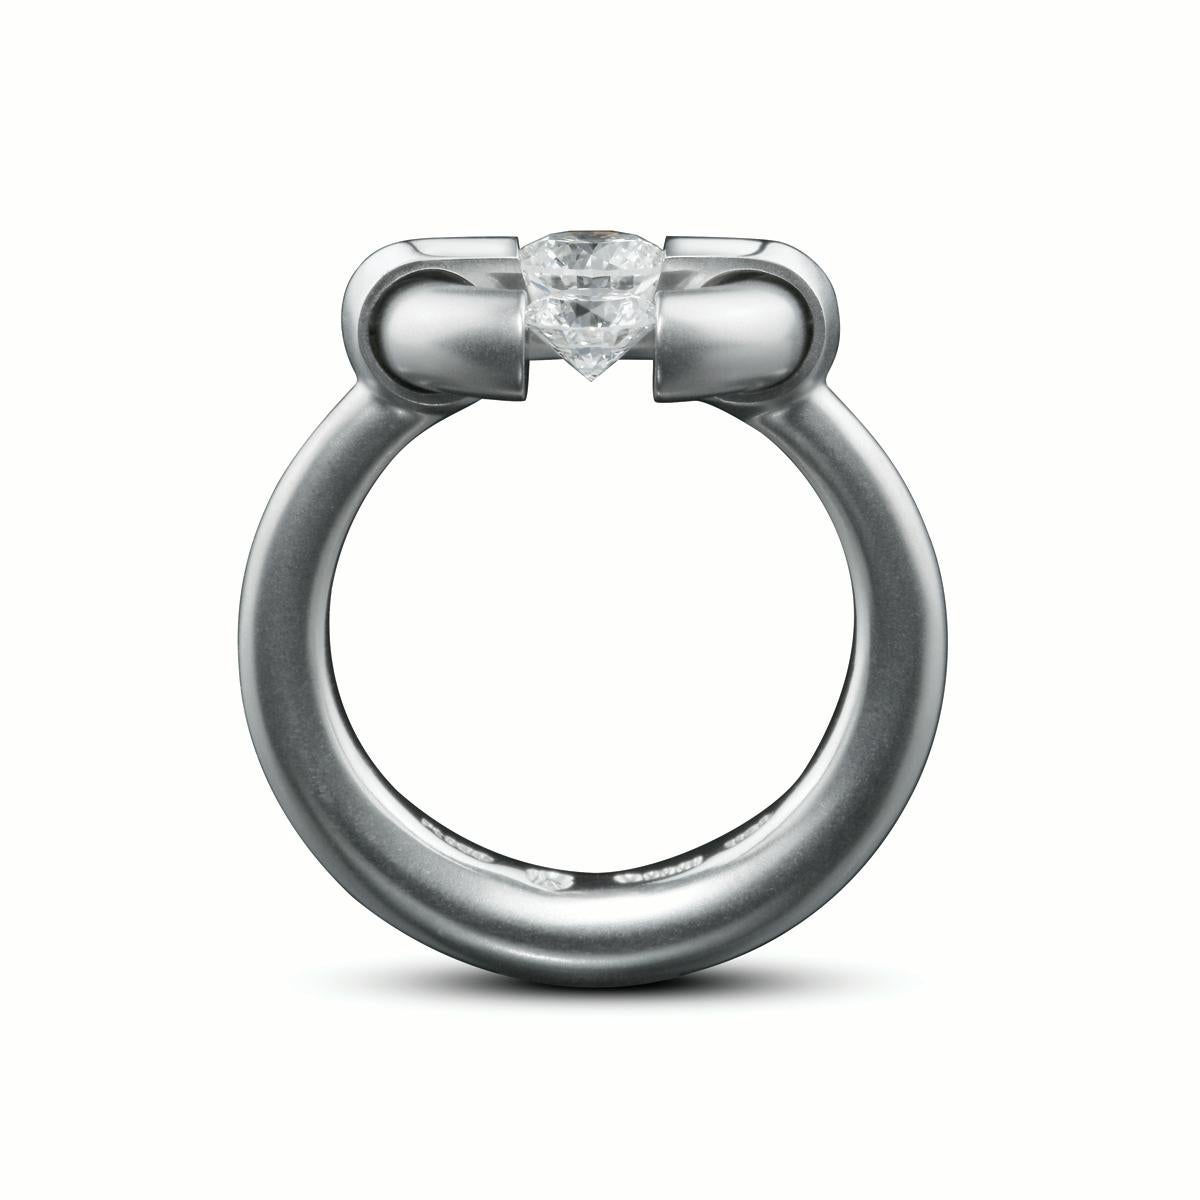 The Steven Kretchmer 2-Stone Jazz ring with 2 Tension-Set diamonds is handcrafted in platinum with a half matte finish. The ring features two round brilliant diamonds, one tension-set 0.33ct. F/Si1 stone on the edge and one 0.50ct. F/Si1 tension-set